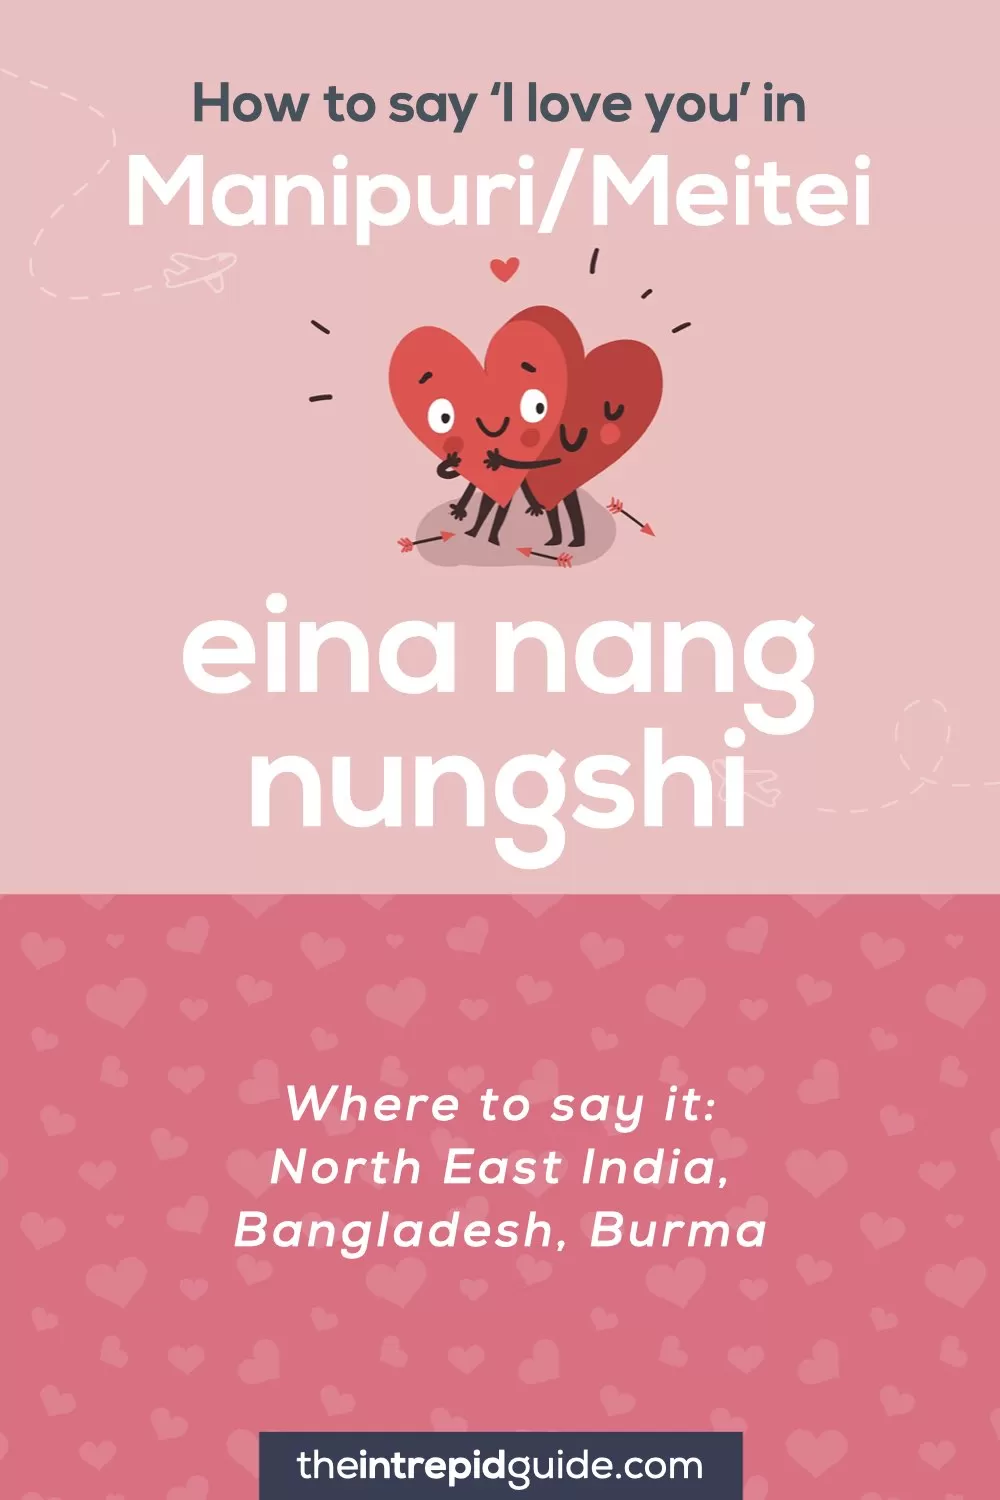 How to say I love you in different languages - Manipuri - Meitei - eina nang nungshi